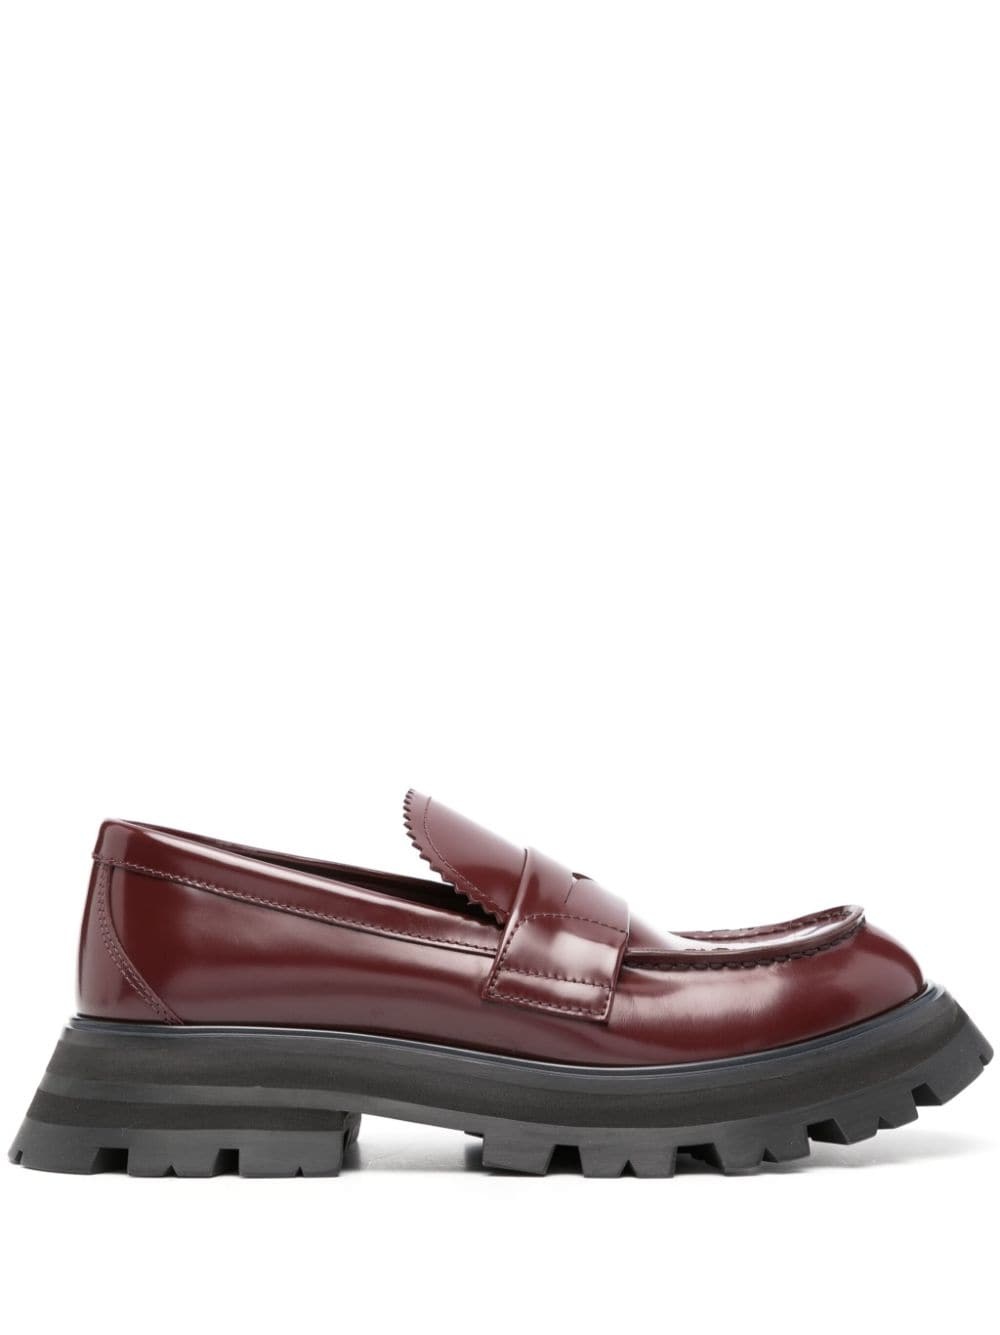 ridged-sole leather loafers - 1